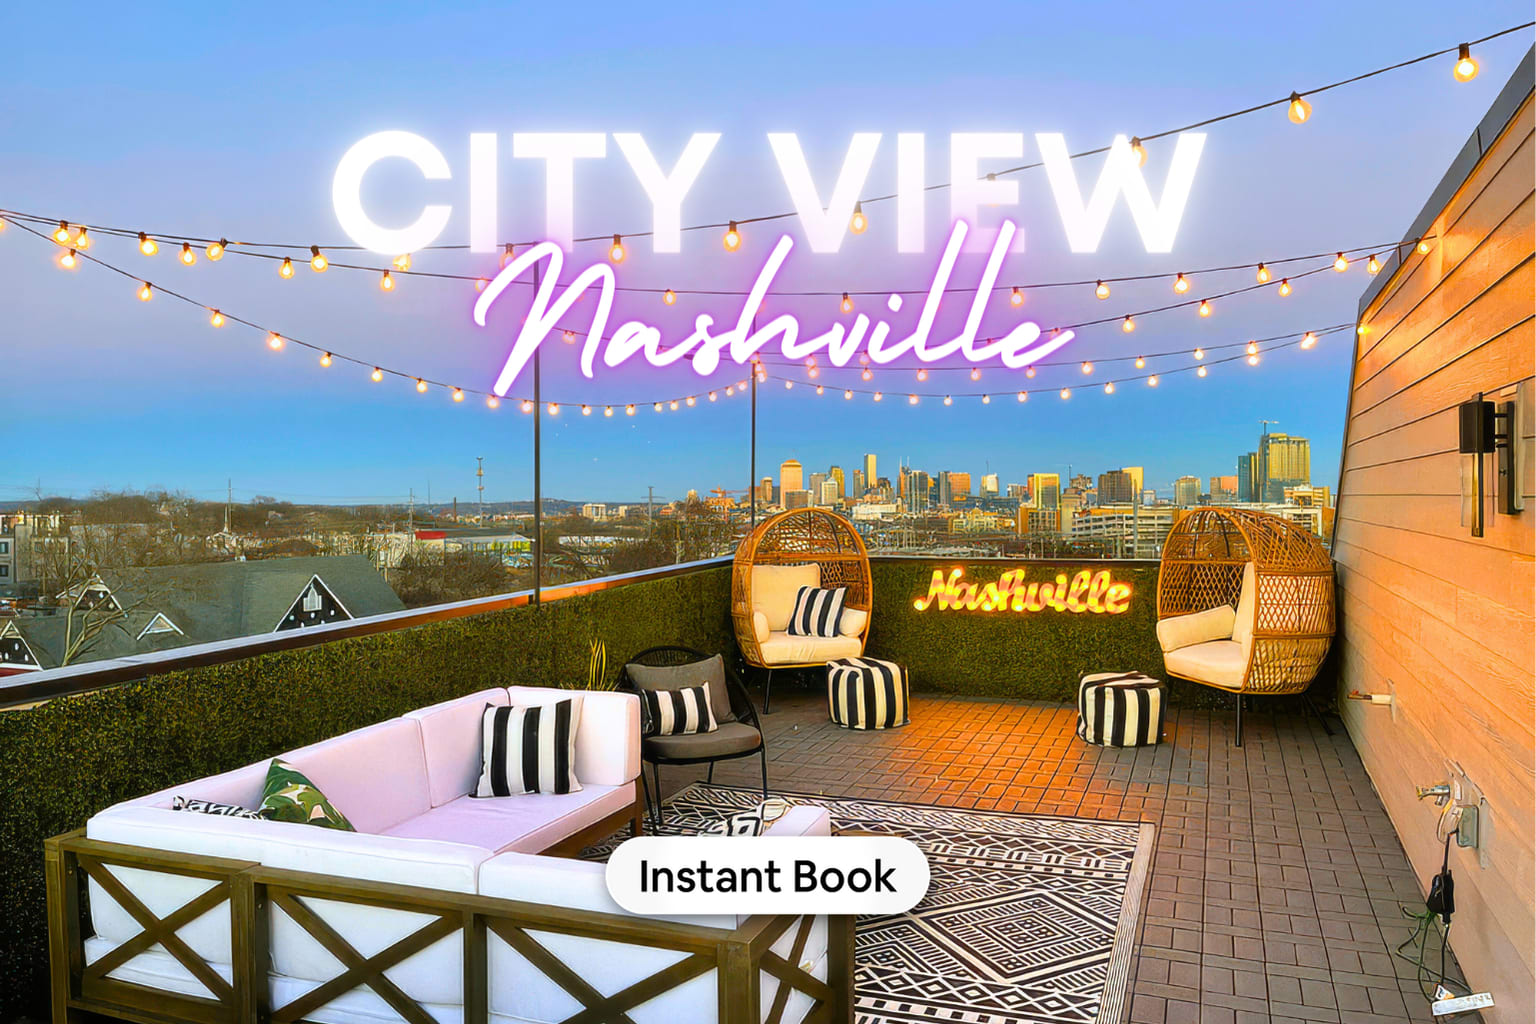 Unwind under twinkling lights with Nashville's skyline as your backdrop at this luxury vacation rental, perfect for your next bachelorette bash or family getaway. Sip local Music City brews on plush seating and let the vibrant pulse of the city energize your vacation. Ready to make memories? Secure this view with Misfit Homes – book today! 🌟🎶